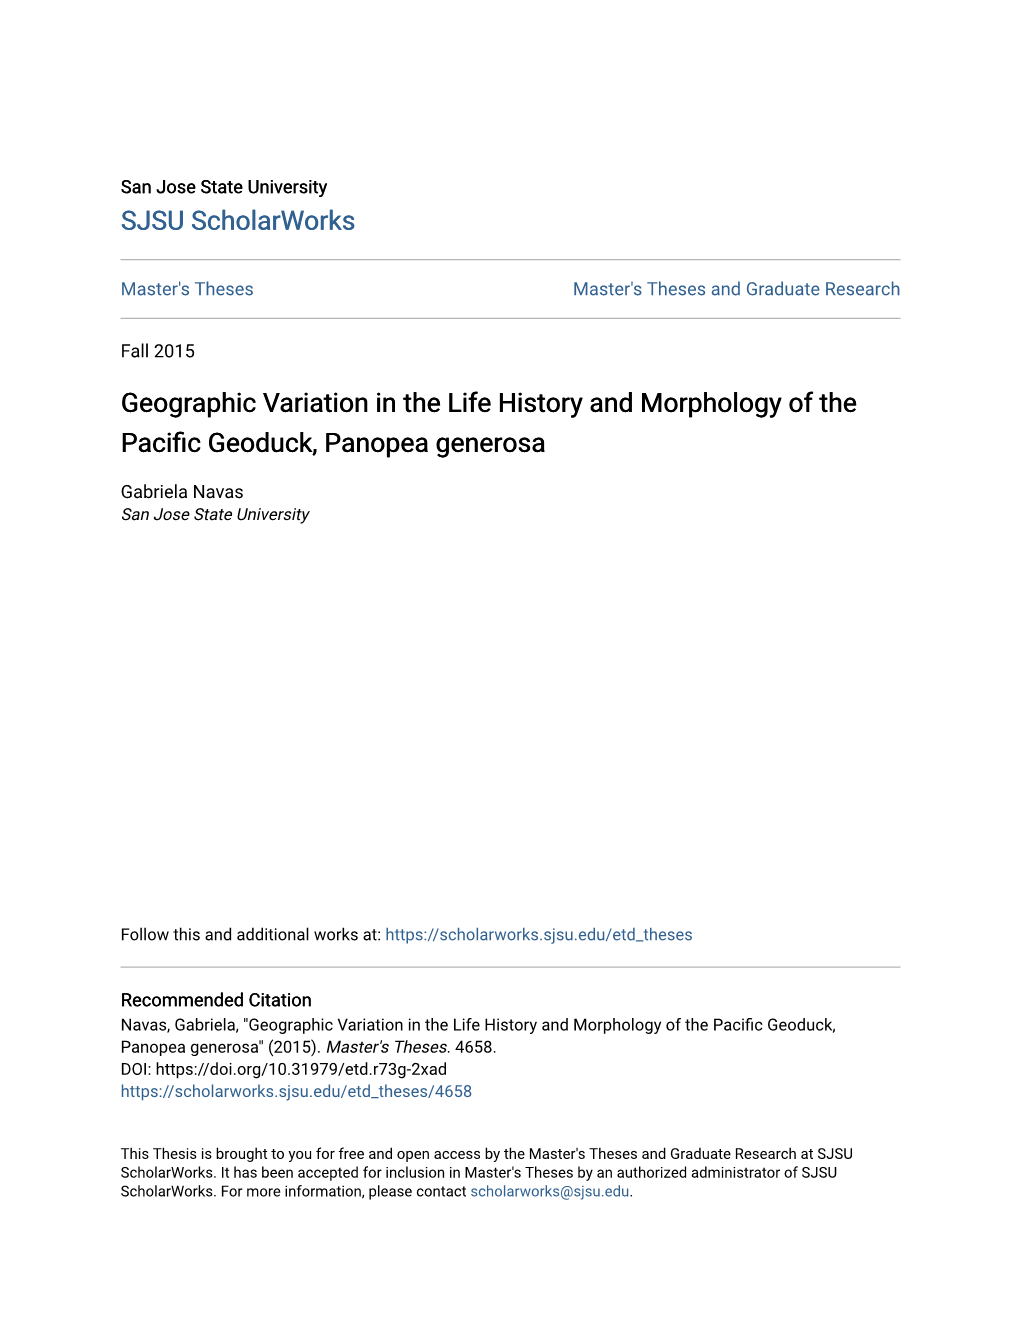 Geographic Variation in the Life History and Morphology of the Pacific Geoduck, Anopeap Generosa